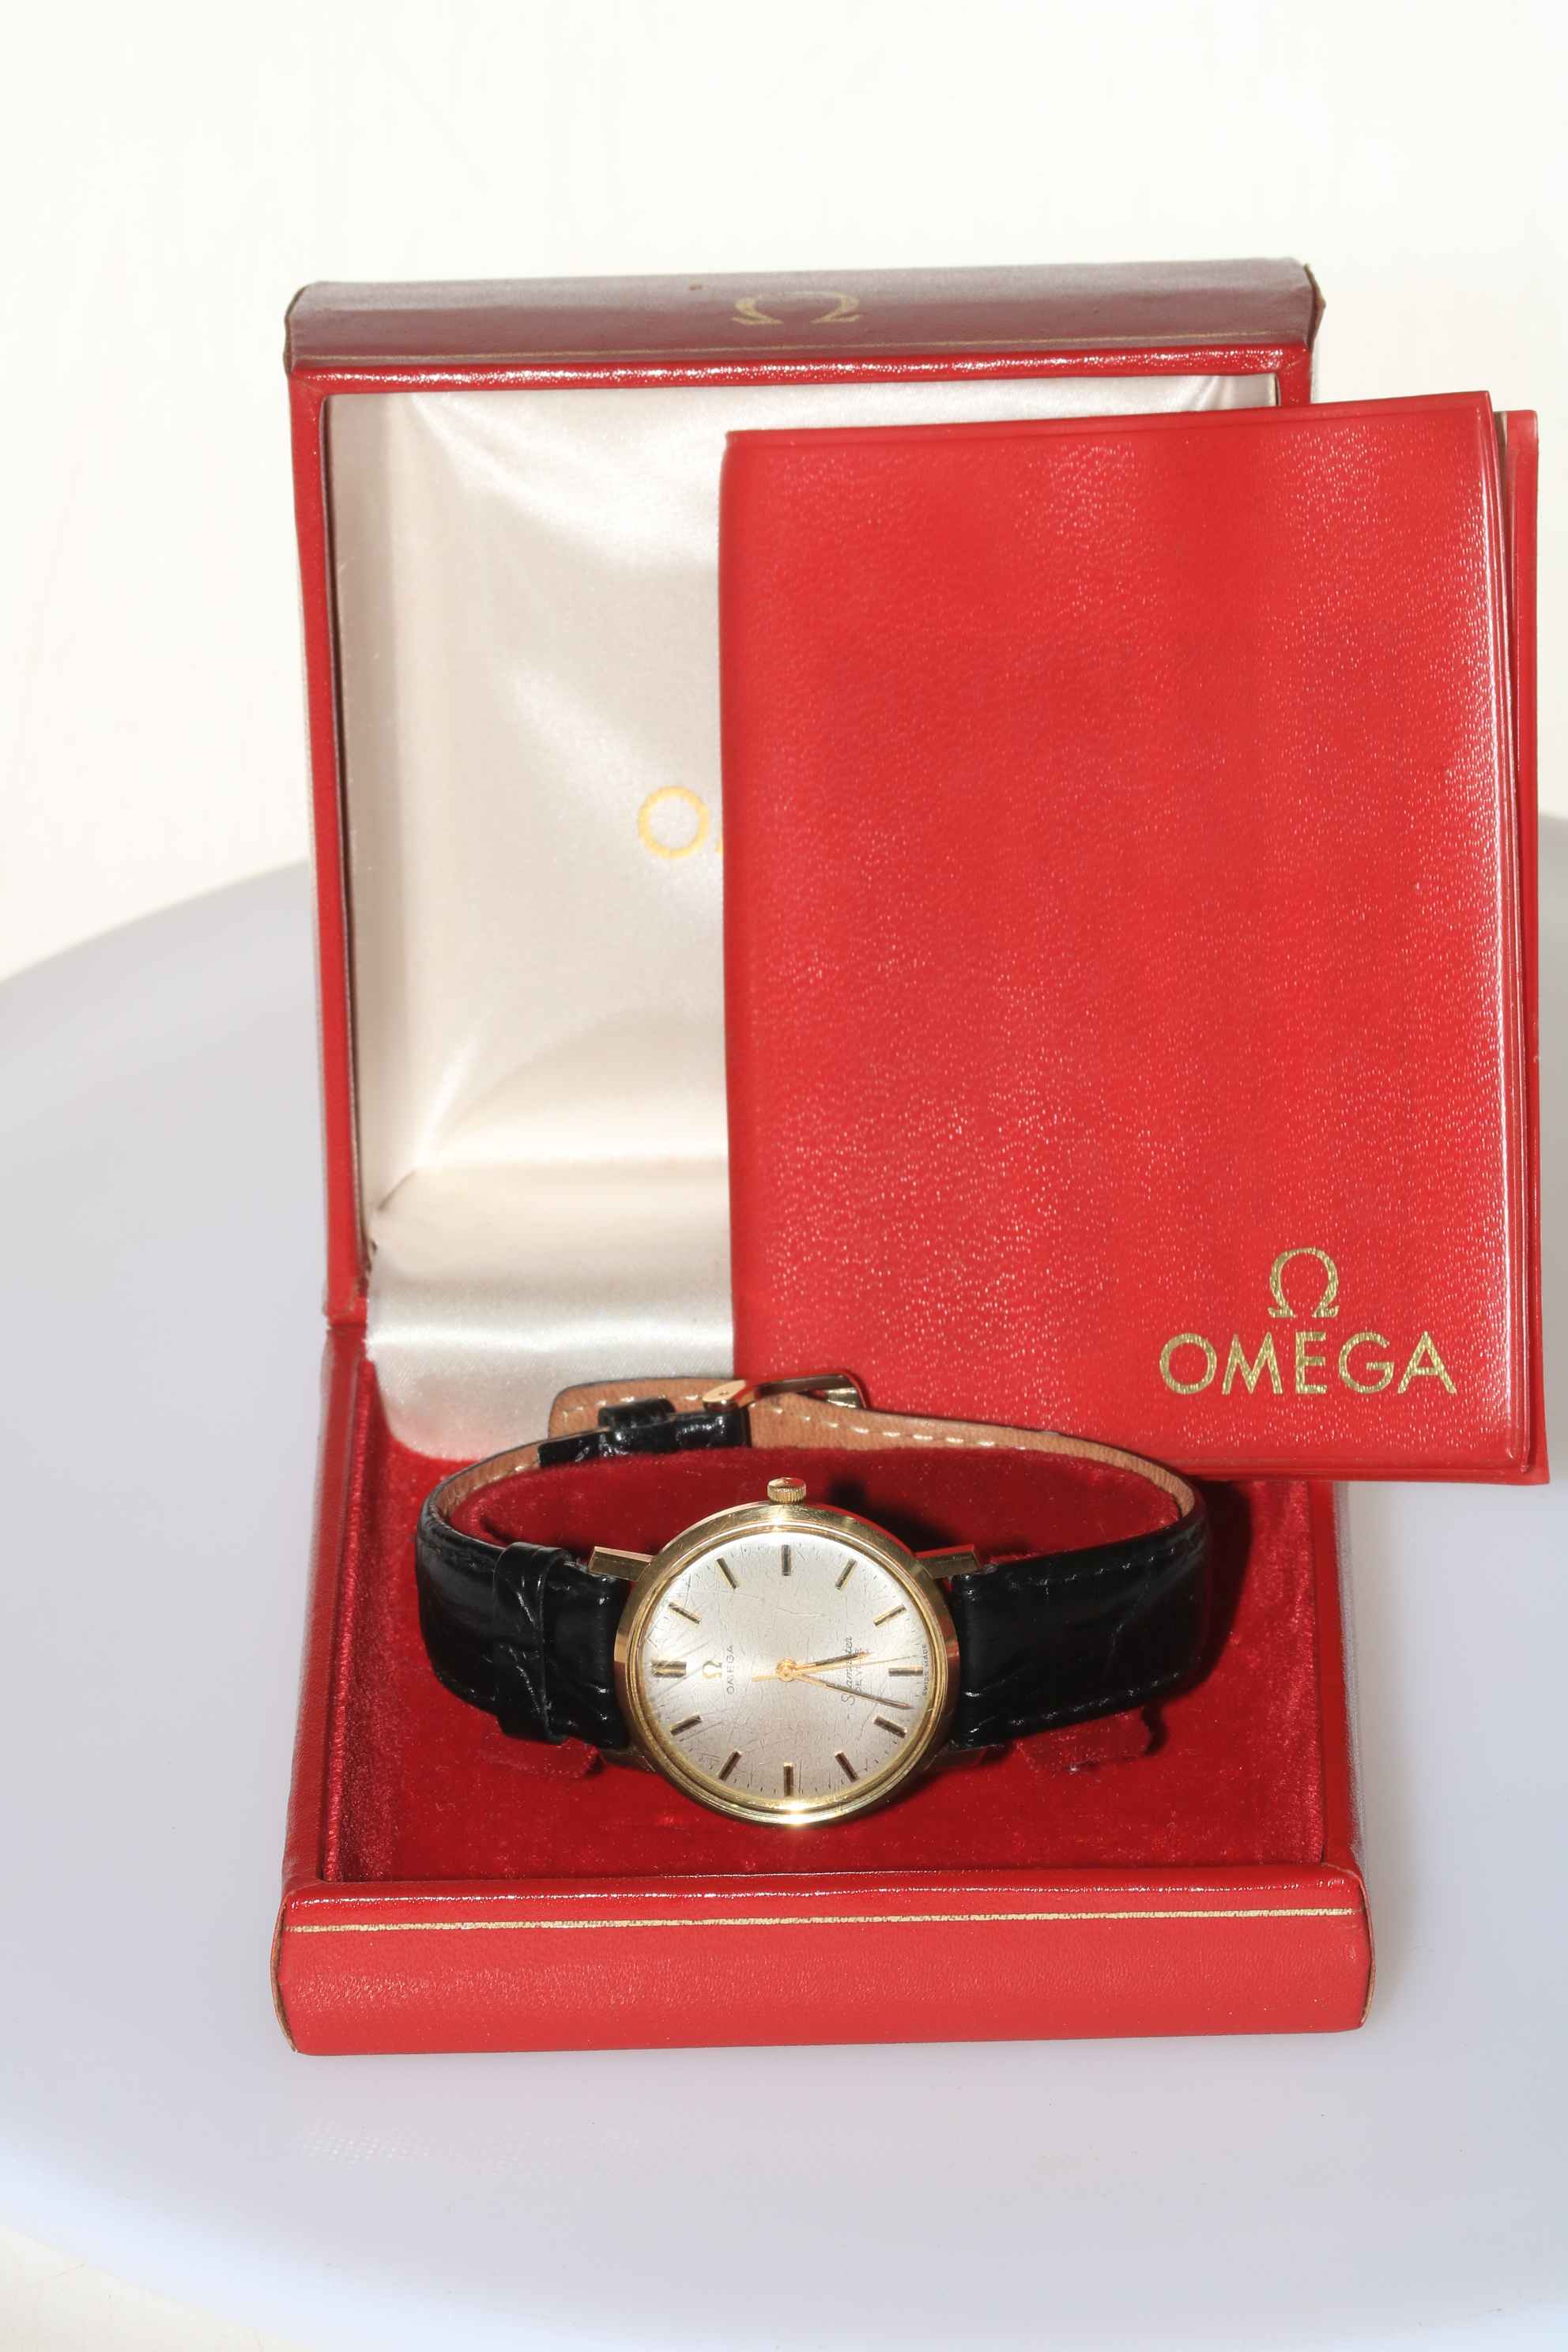 Omega gents 9 carat gold Seamaster de Ville wristwatch with papers dated 1969, and box.